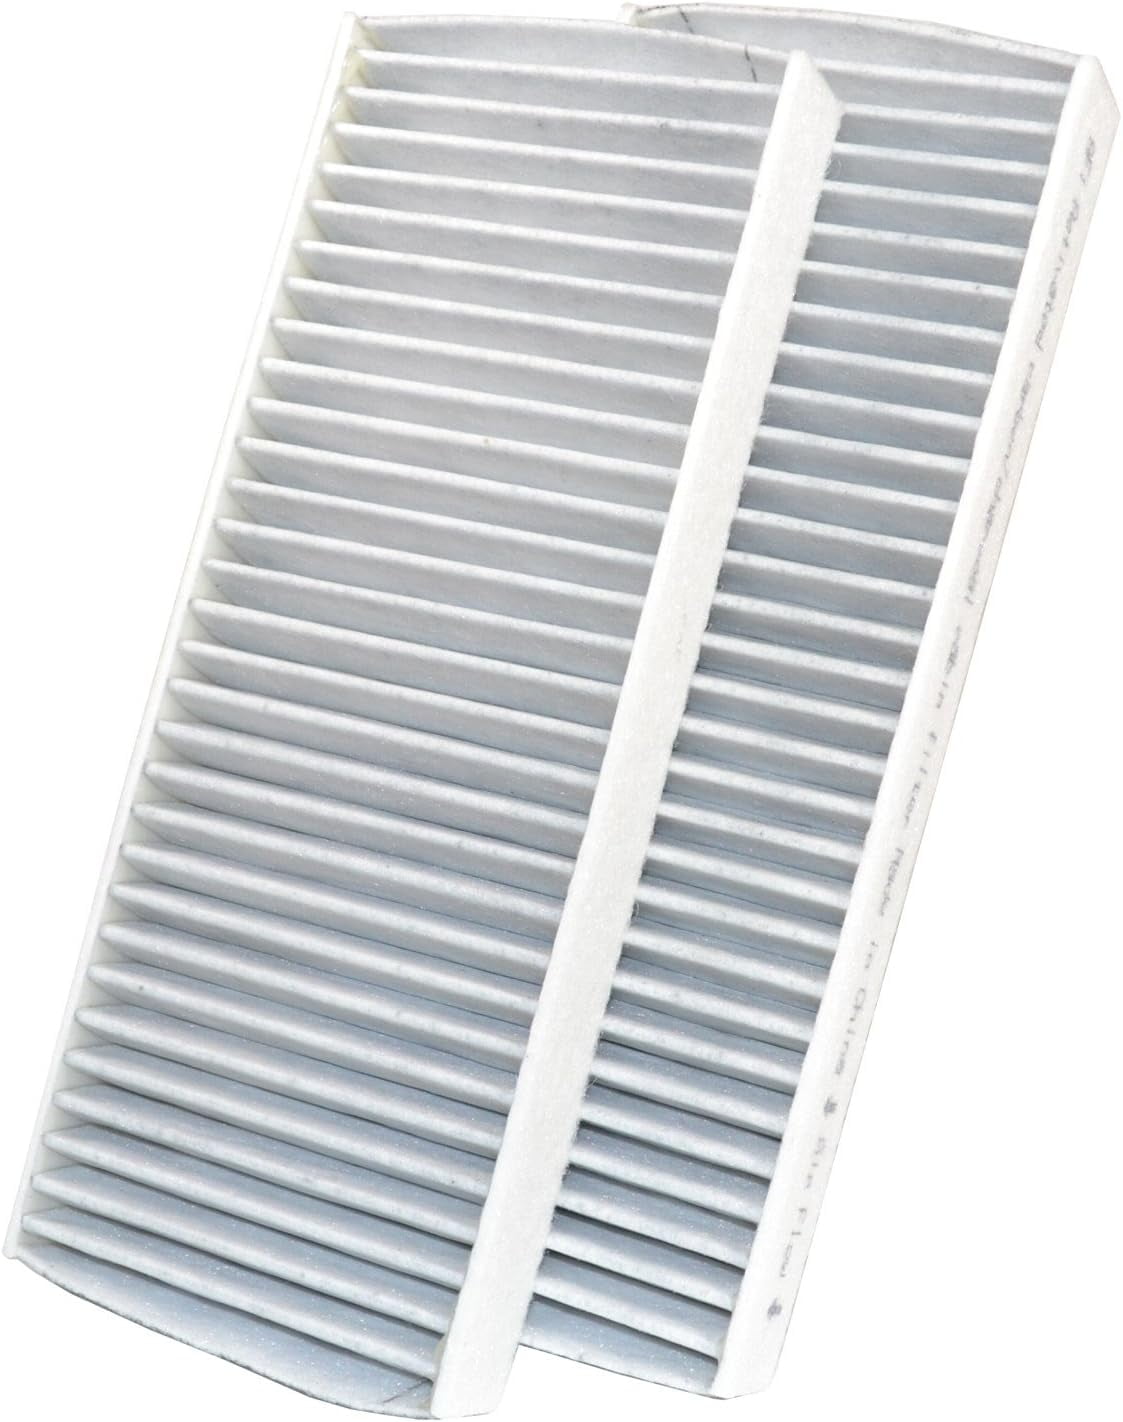 HQRP 2-Pack Carbon A/C Cabin Air Filters for Nissan Frontier 2005-2016;  Pathfinder 2005-2012; Xterra 2005-2015